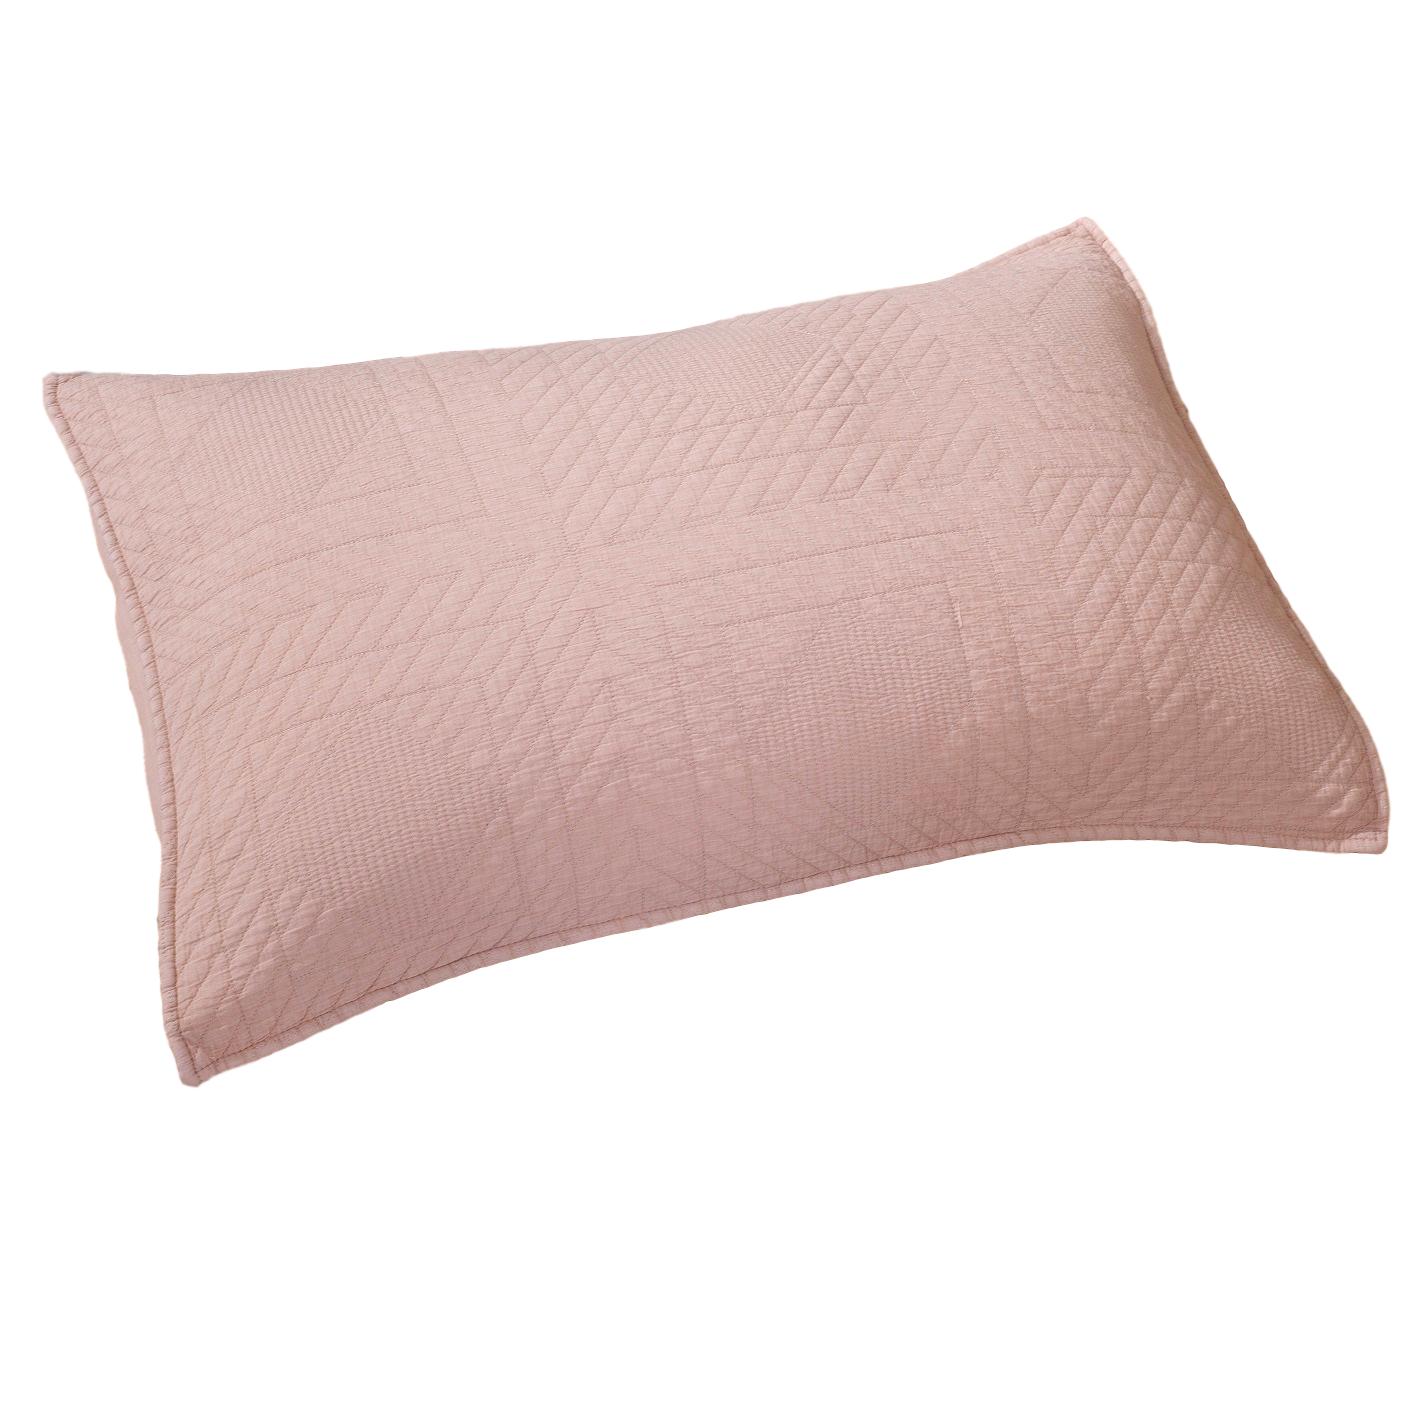 Tache Cotton Stone Washed Soothing Pastel Rustic Blush Pink Diamond Pillow Sham (JHW-863) - Tache Home Fashion